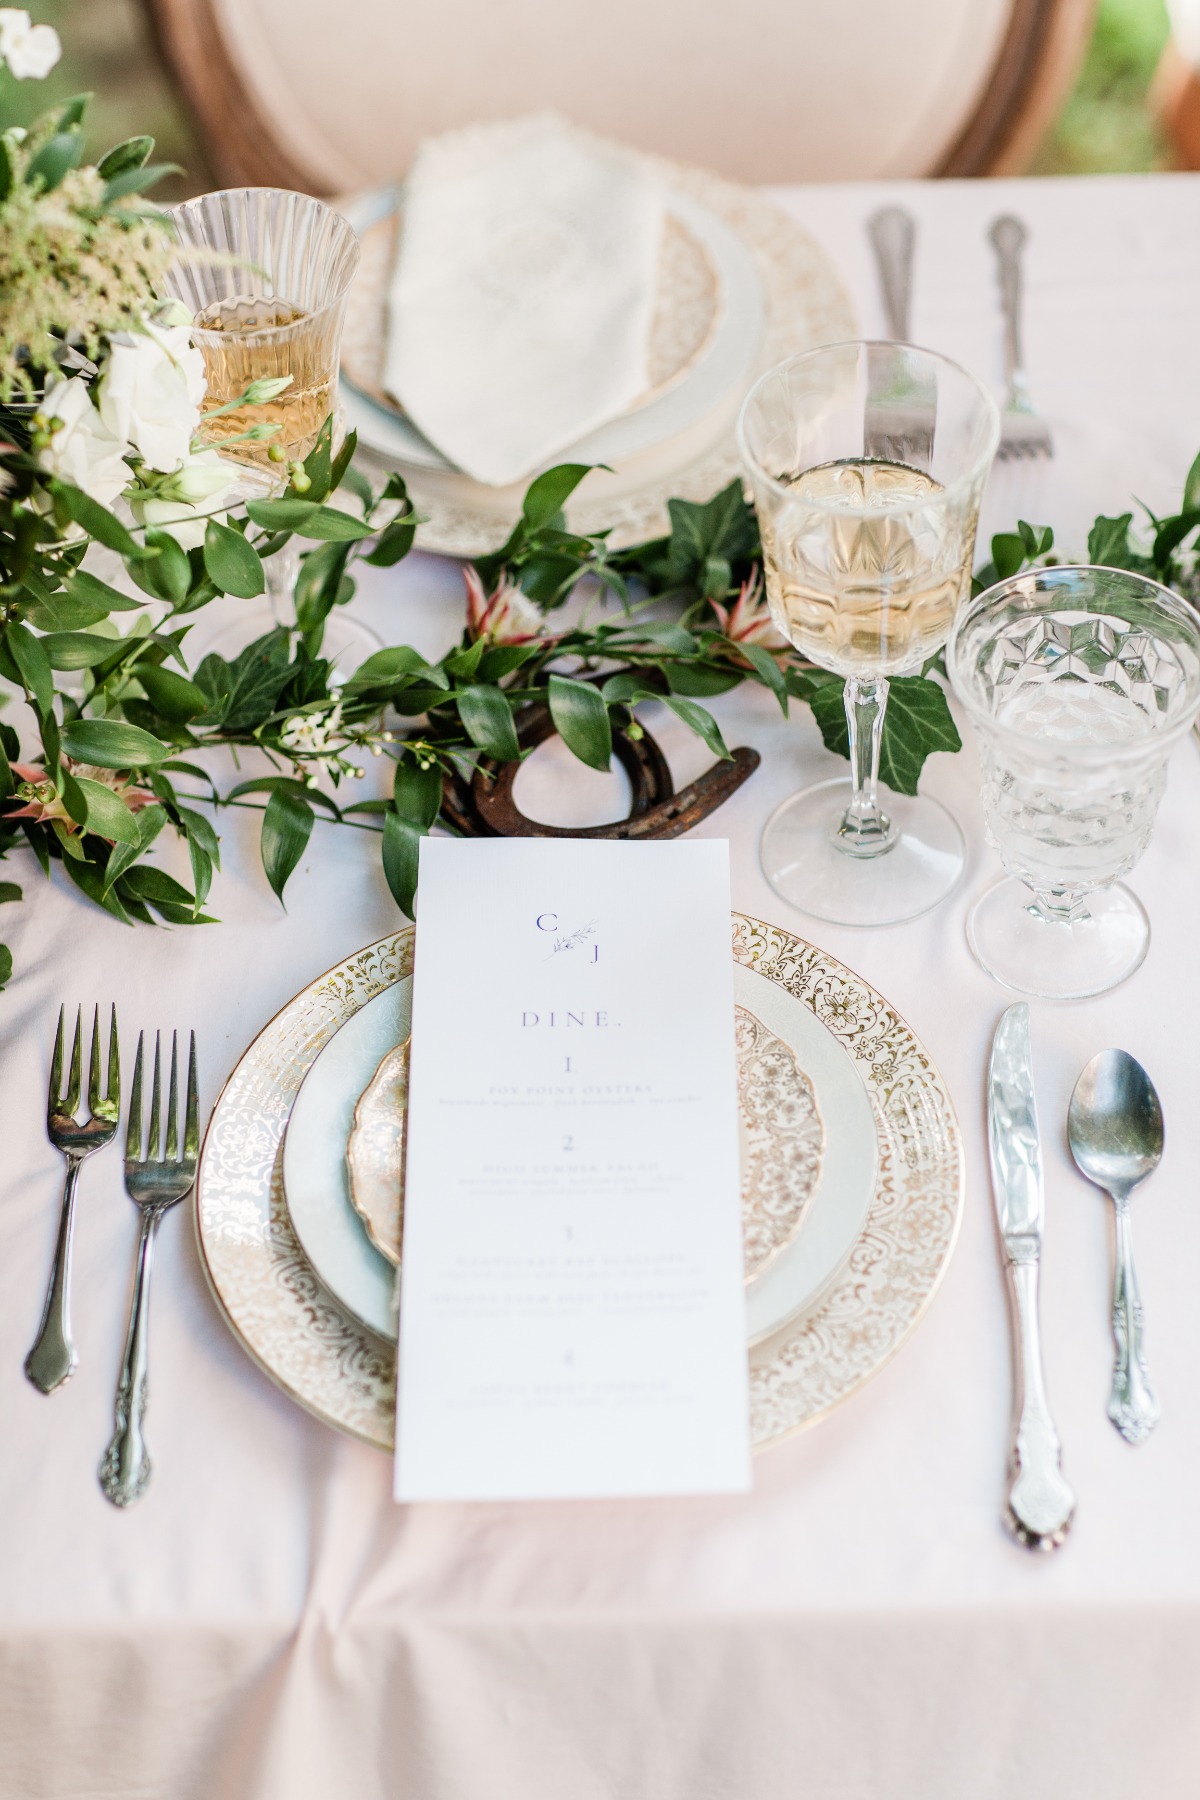 elegant wedding at the derby inspired table decor